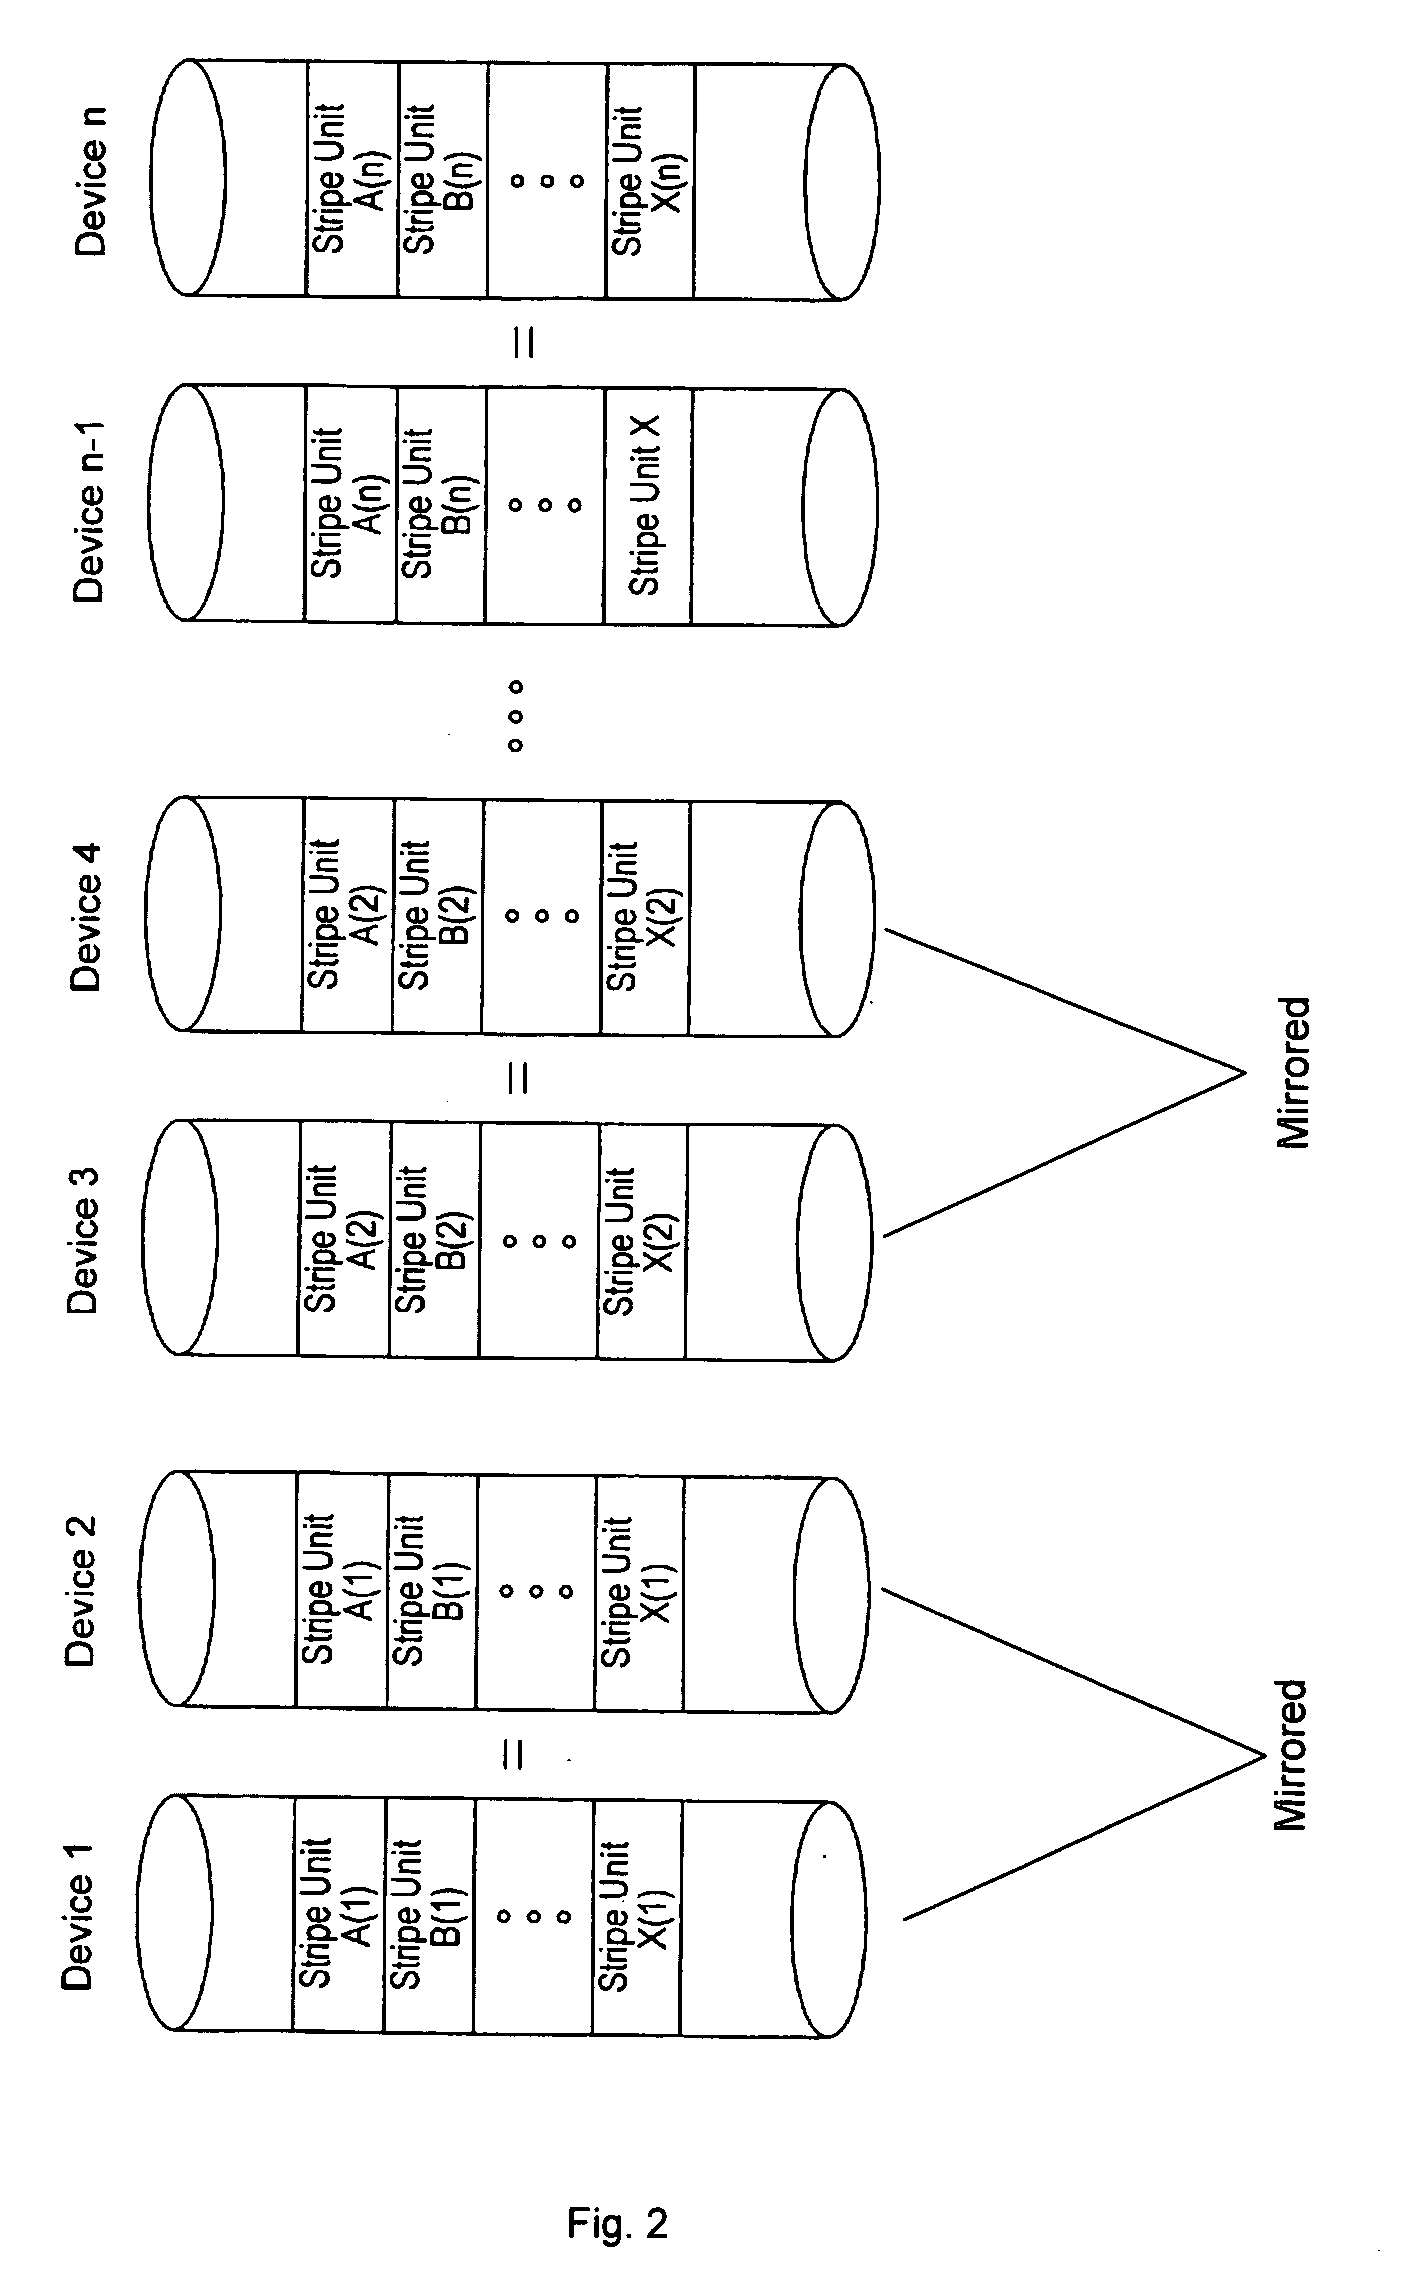 Method, apparatus and program storage device that provide virtual space to handle storage device failures in a storage system